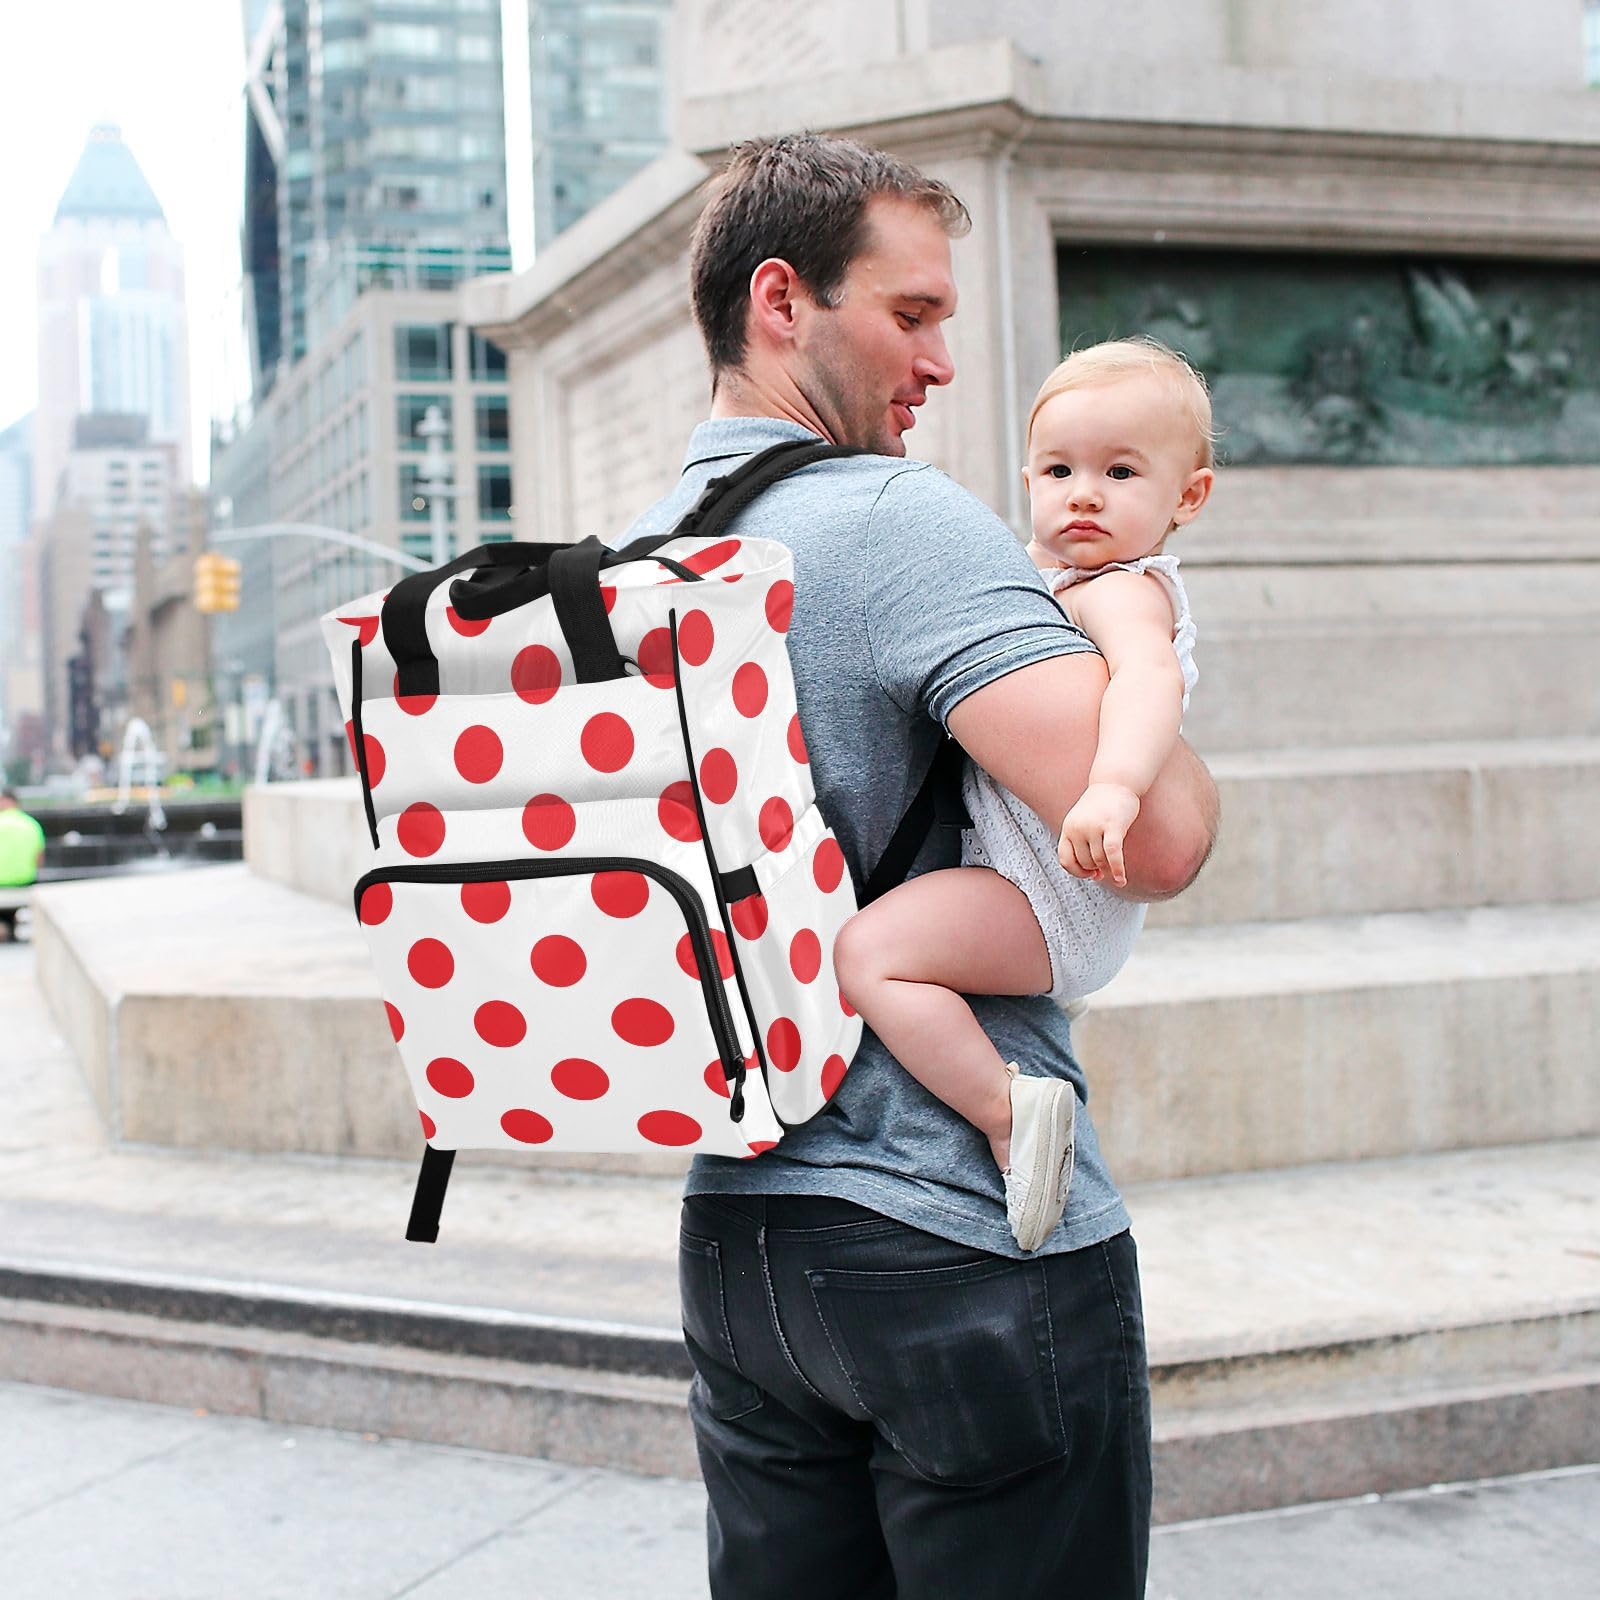 innewgogo Polka Dot Red White Diaper Bag Backpack for Dad Mom Large Capacity Baby Changing Totes with Three Pockets Multifunction Maternity Travel Bag for Playing Shopping Picnicking